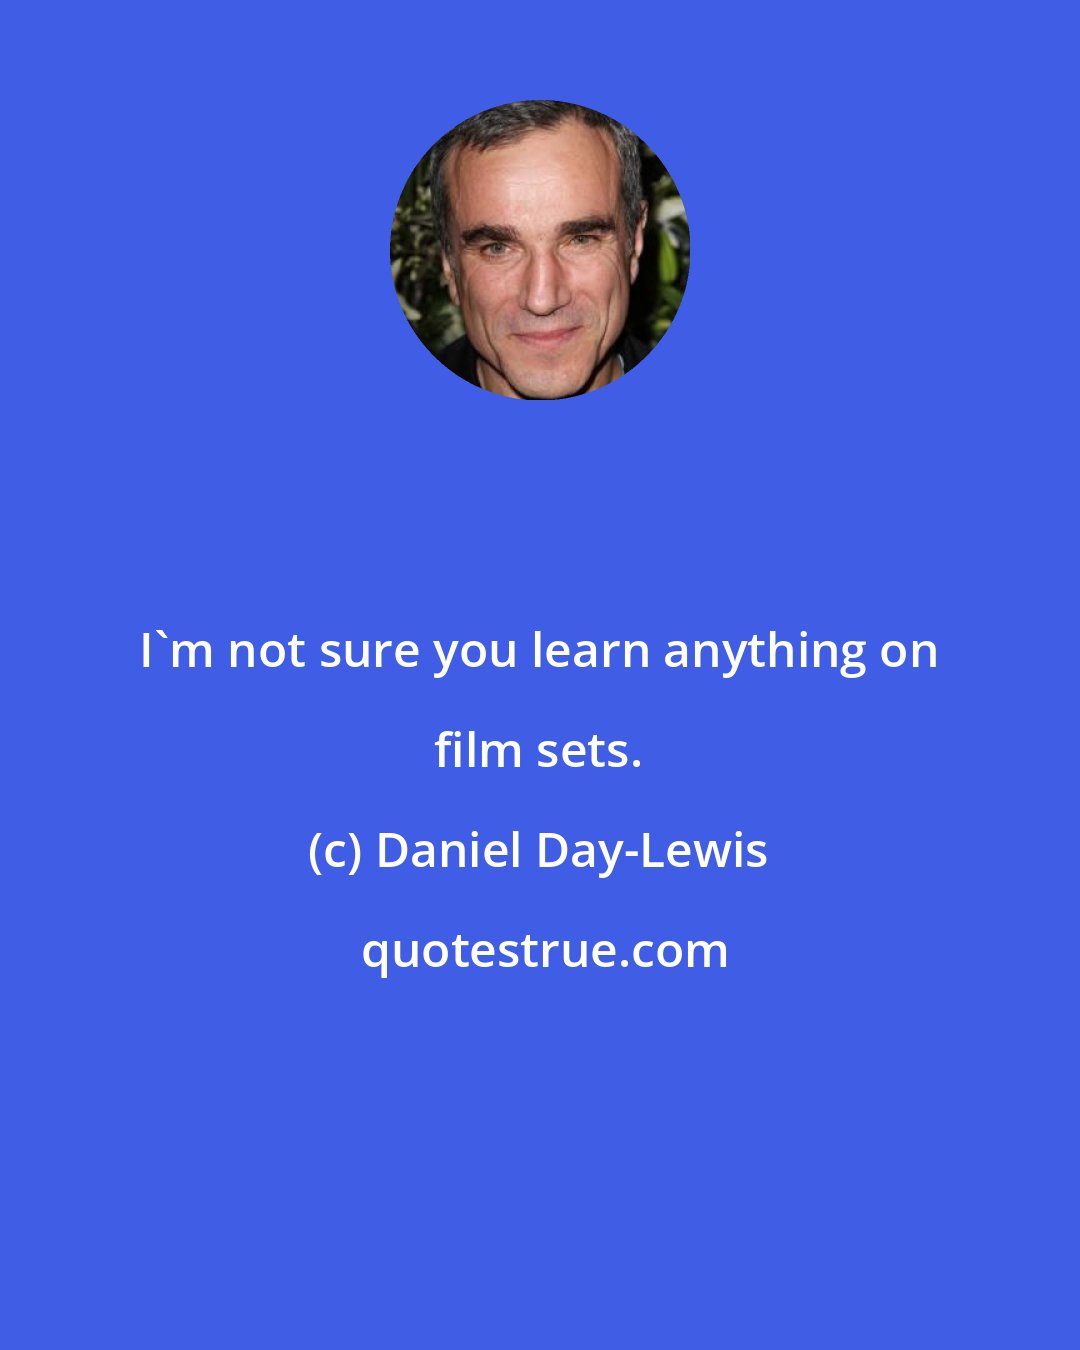 Daniel Day-Lewis: I'm not sure you learn anything on film sets.